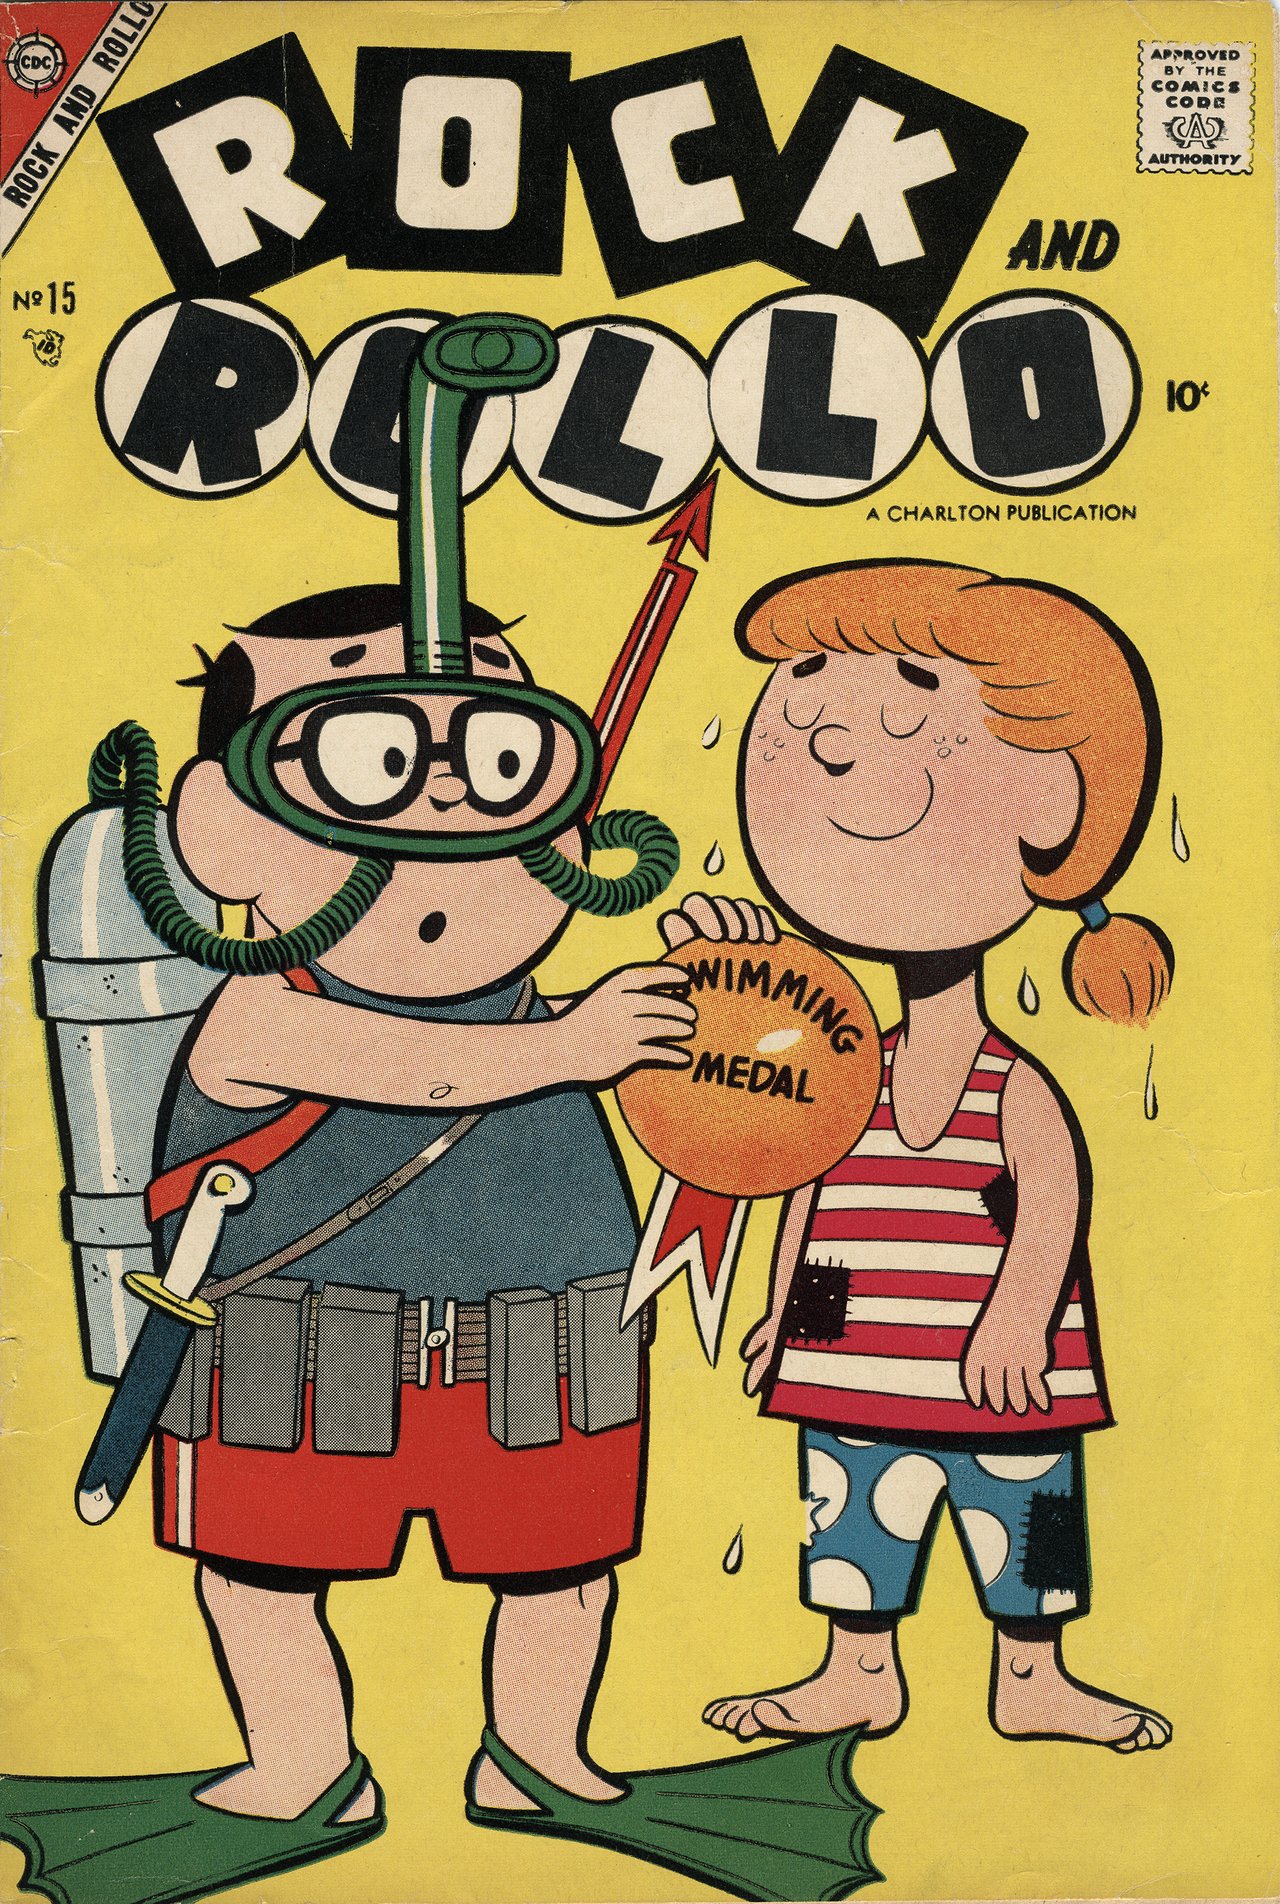 Read online Rock and Rollo comic -  Issue #15 - 1